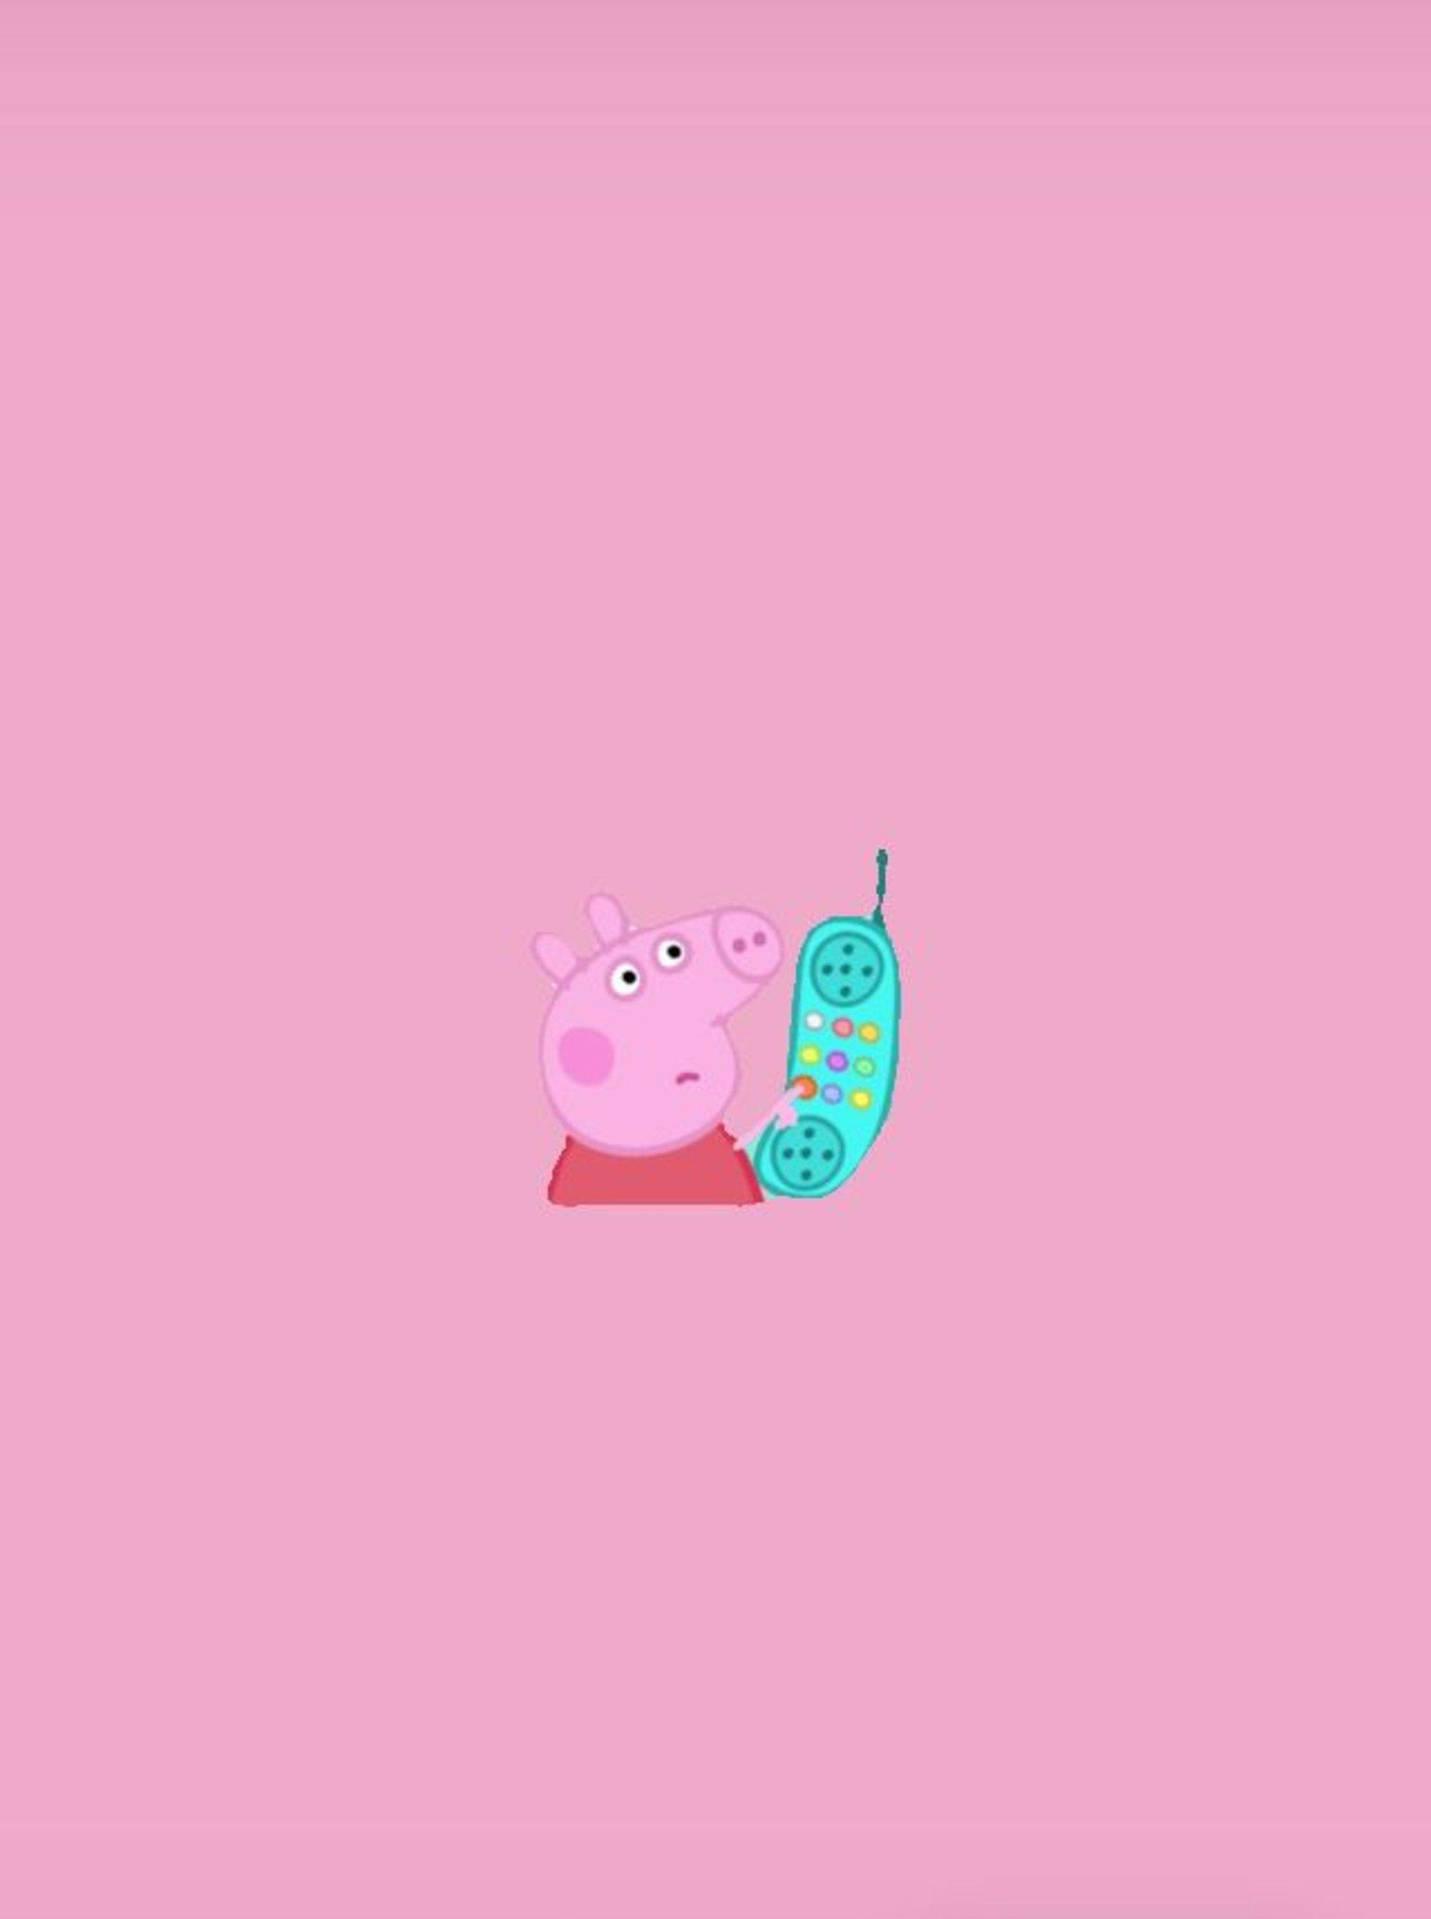 Peppa Pig On A Phone Screen With Pink Background